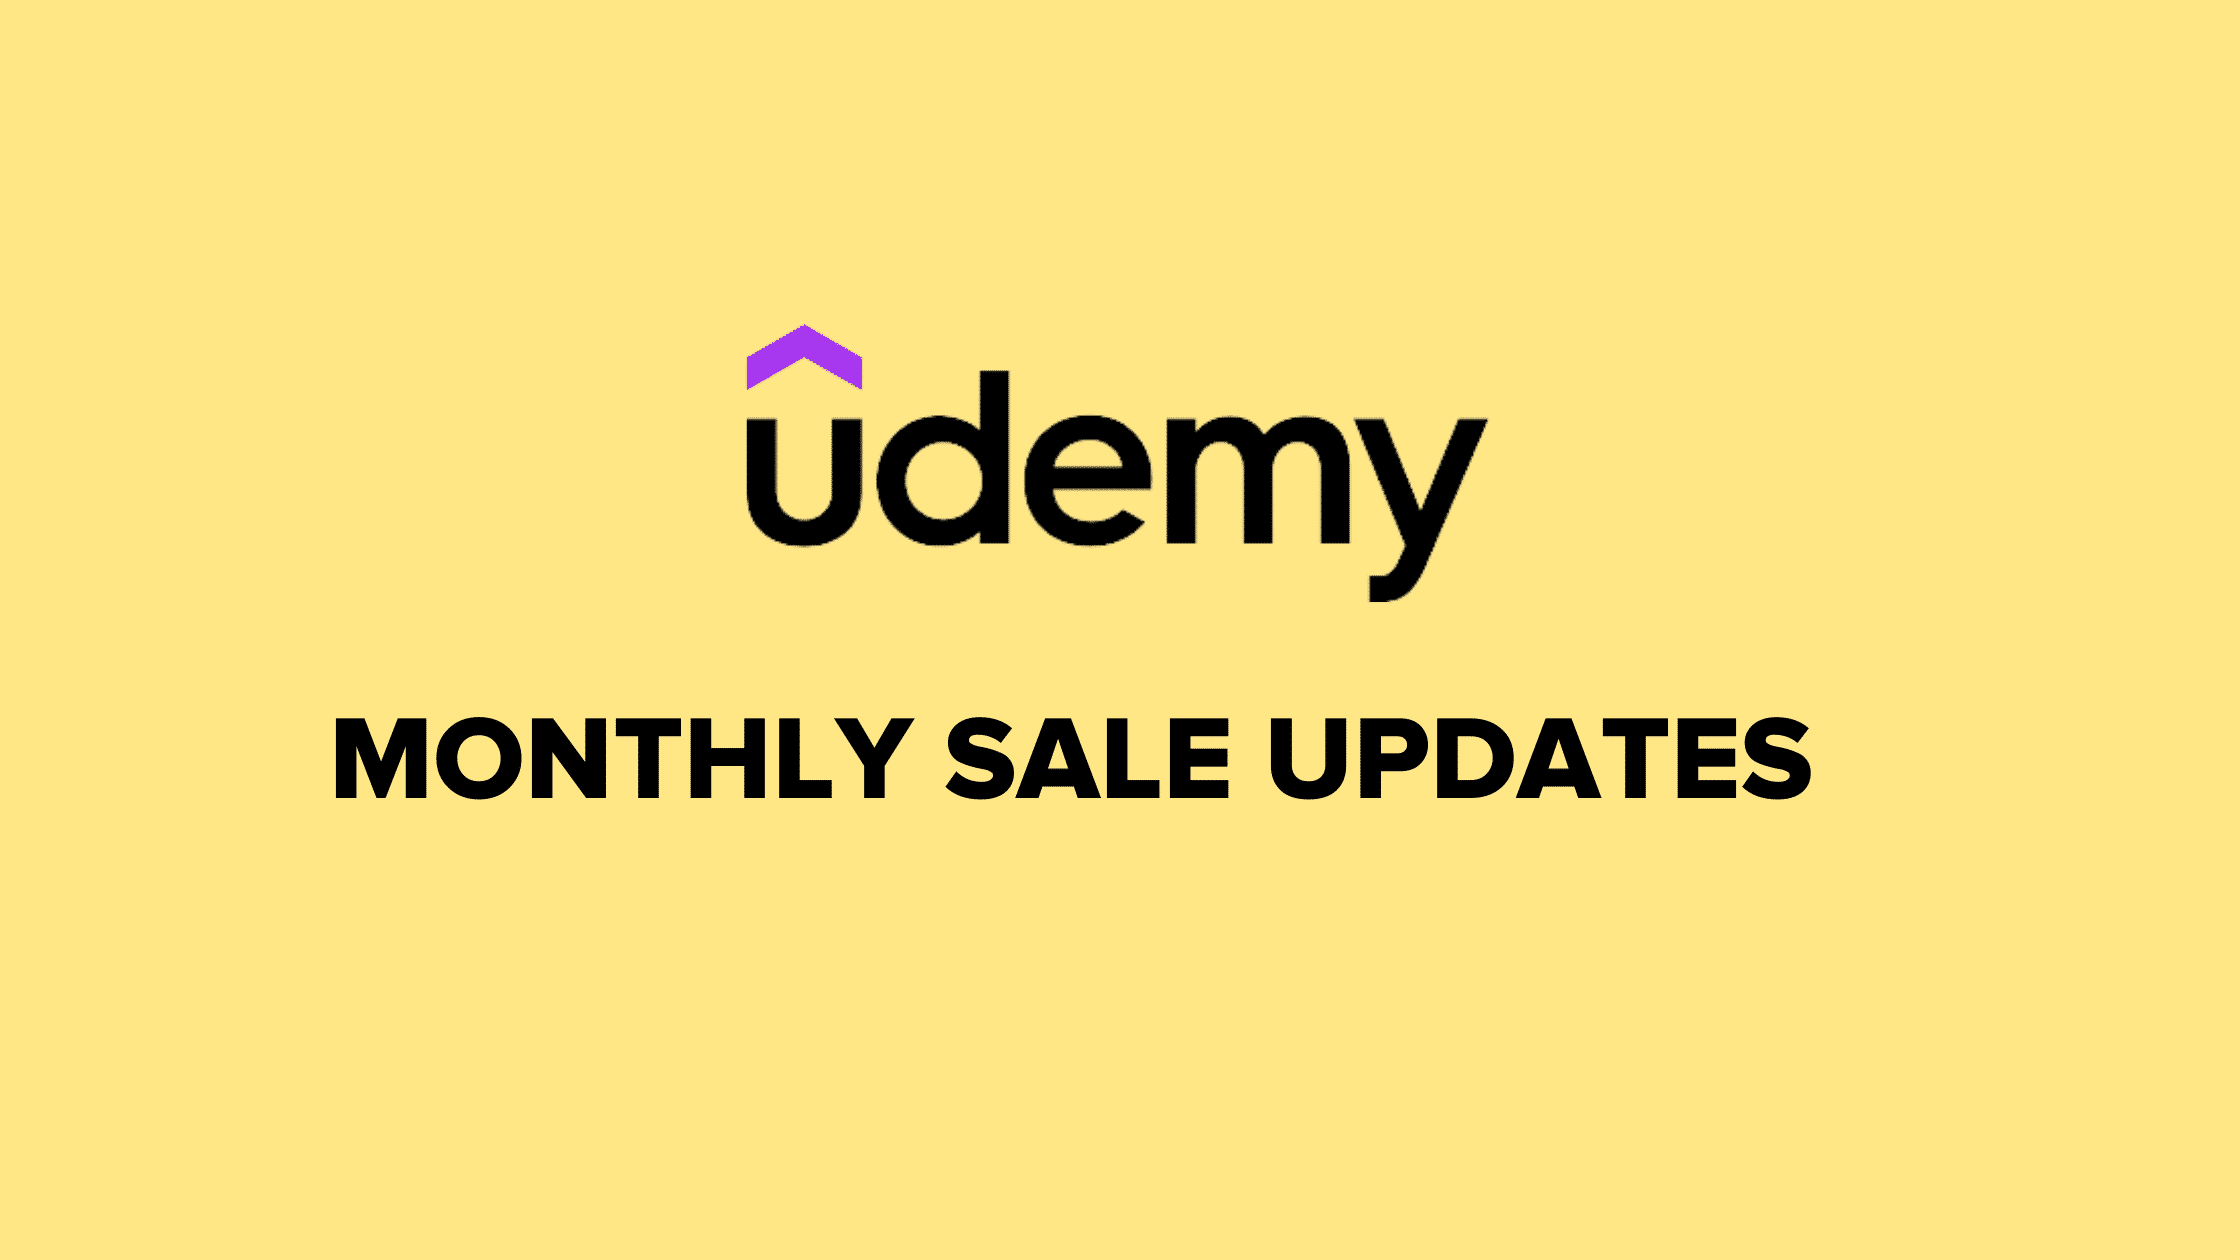 how often does udemy have sales